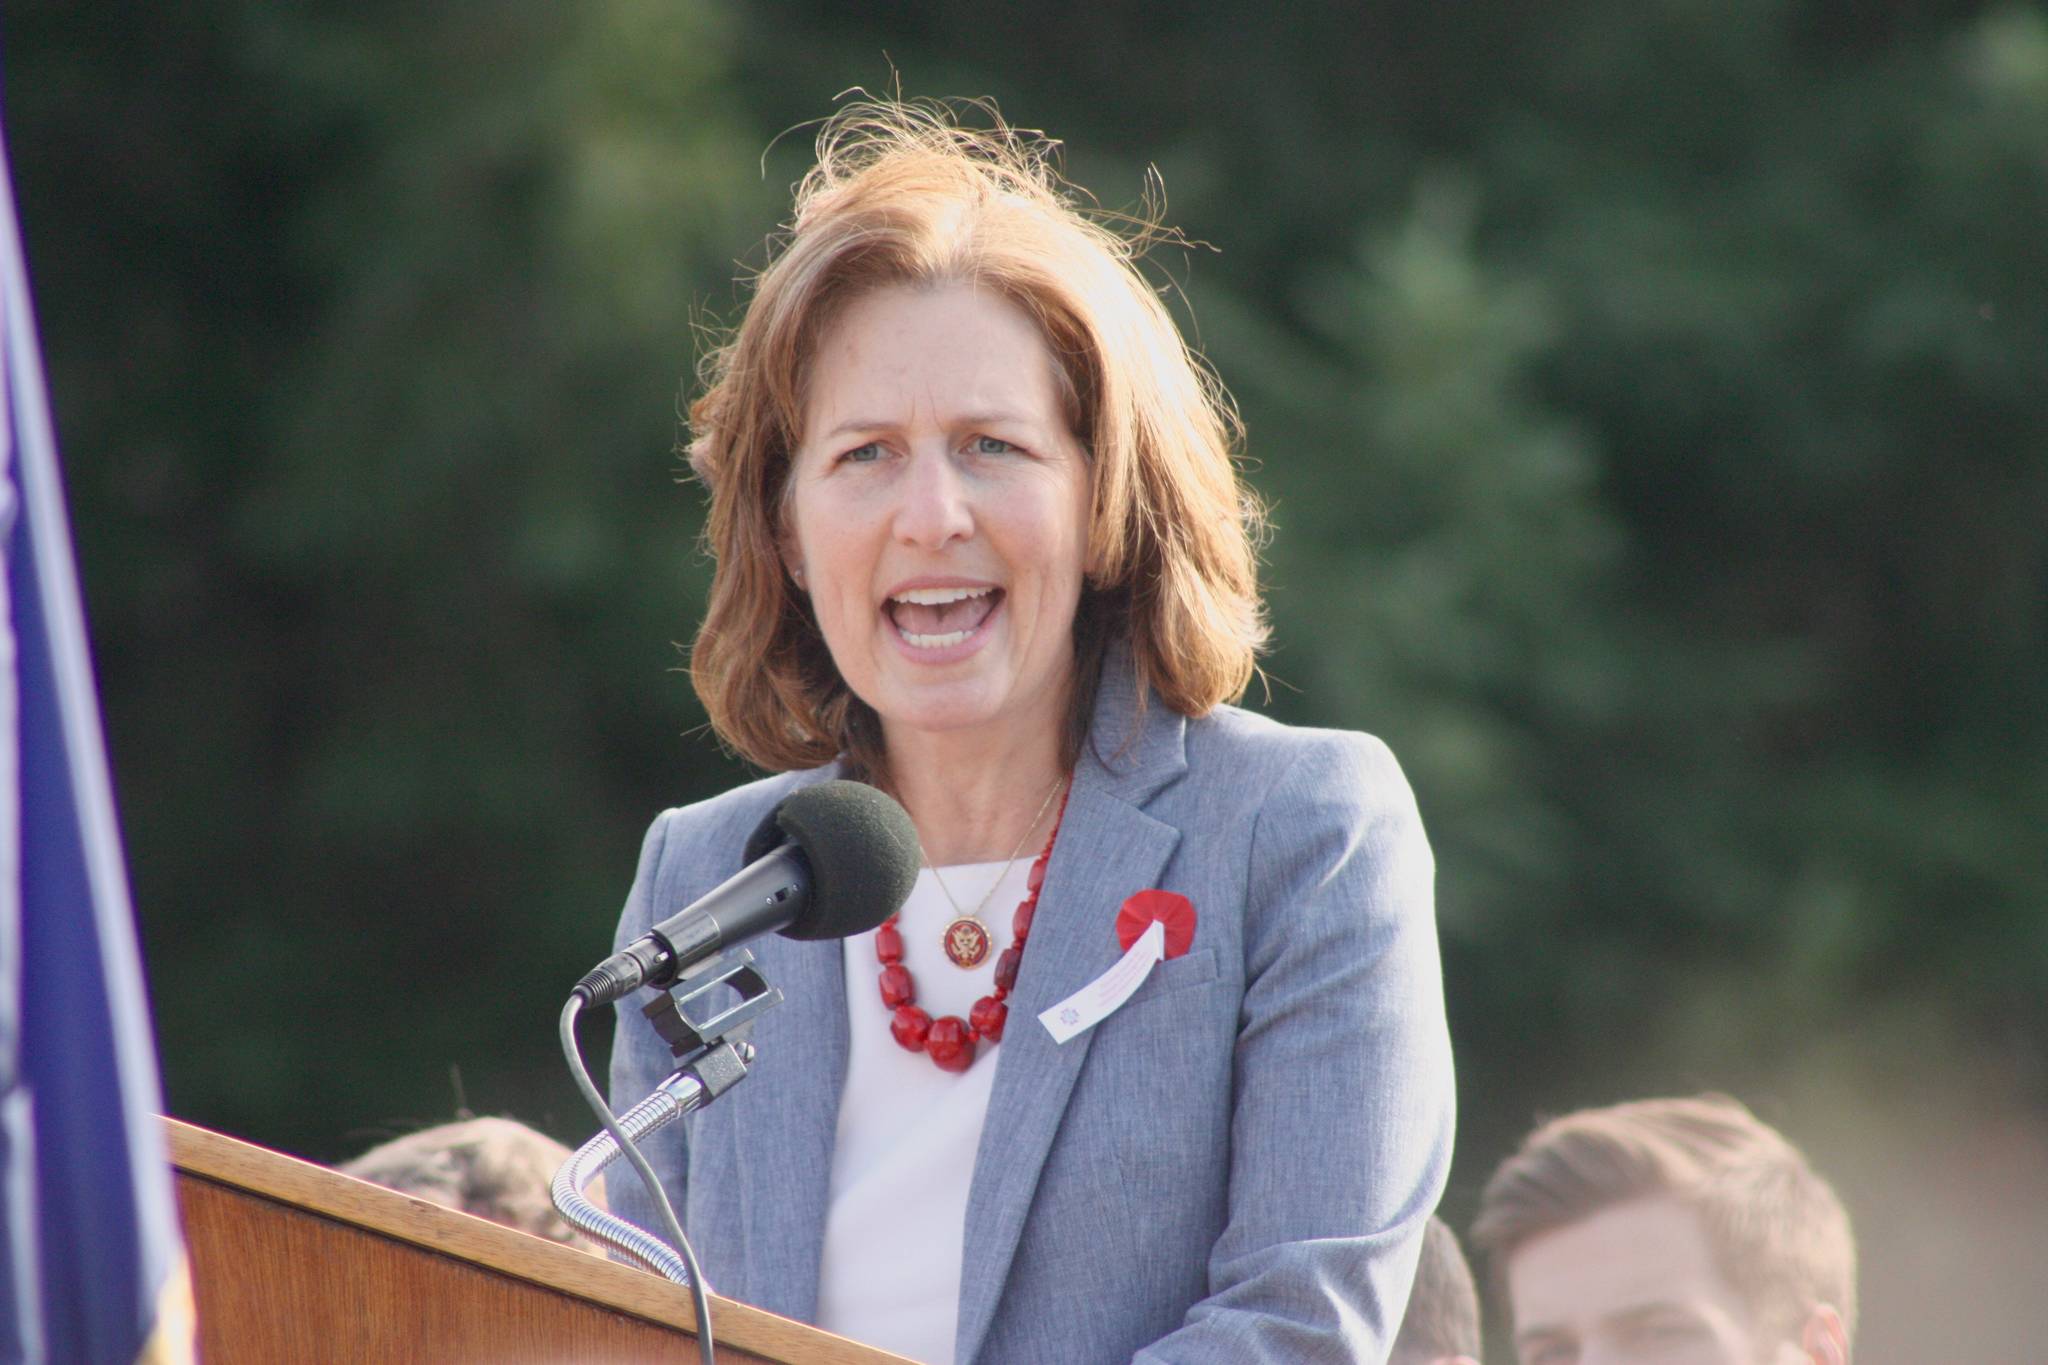 Congresswoman Kim Schrier, D-WA, Eighth District, addresses the crowd at Tahoma National Cemetery. MARK KLAAS, Kent Reporter